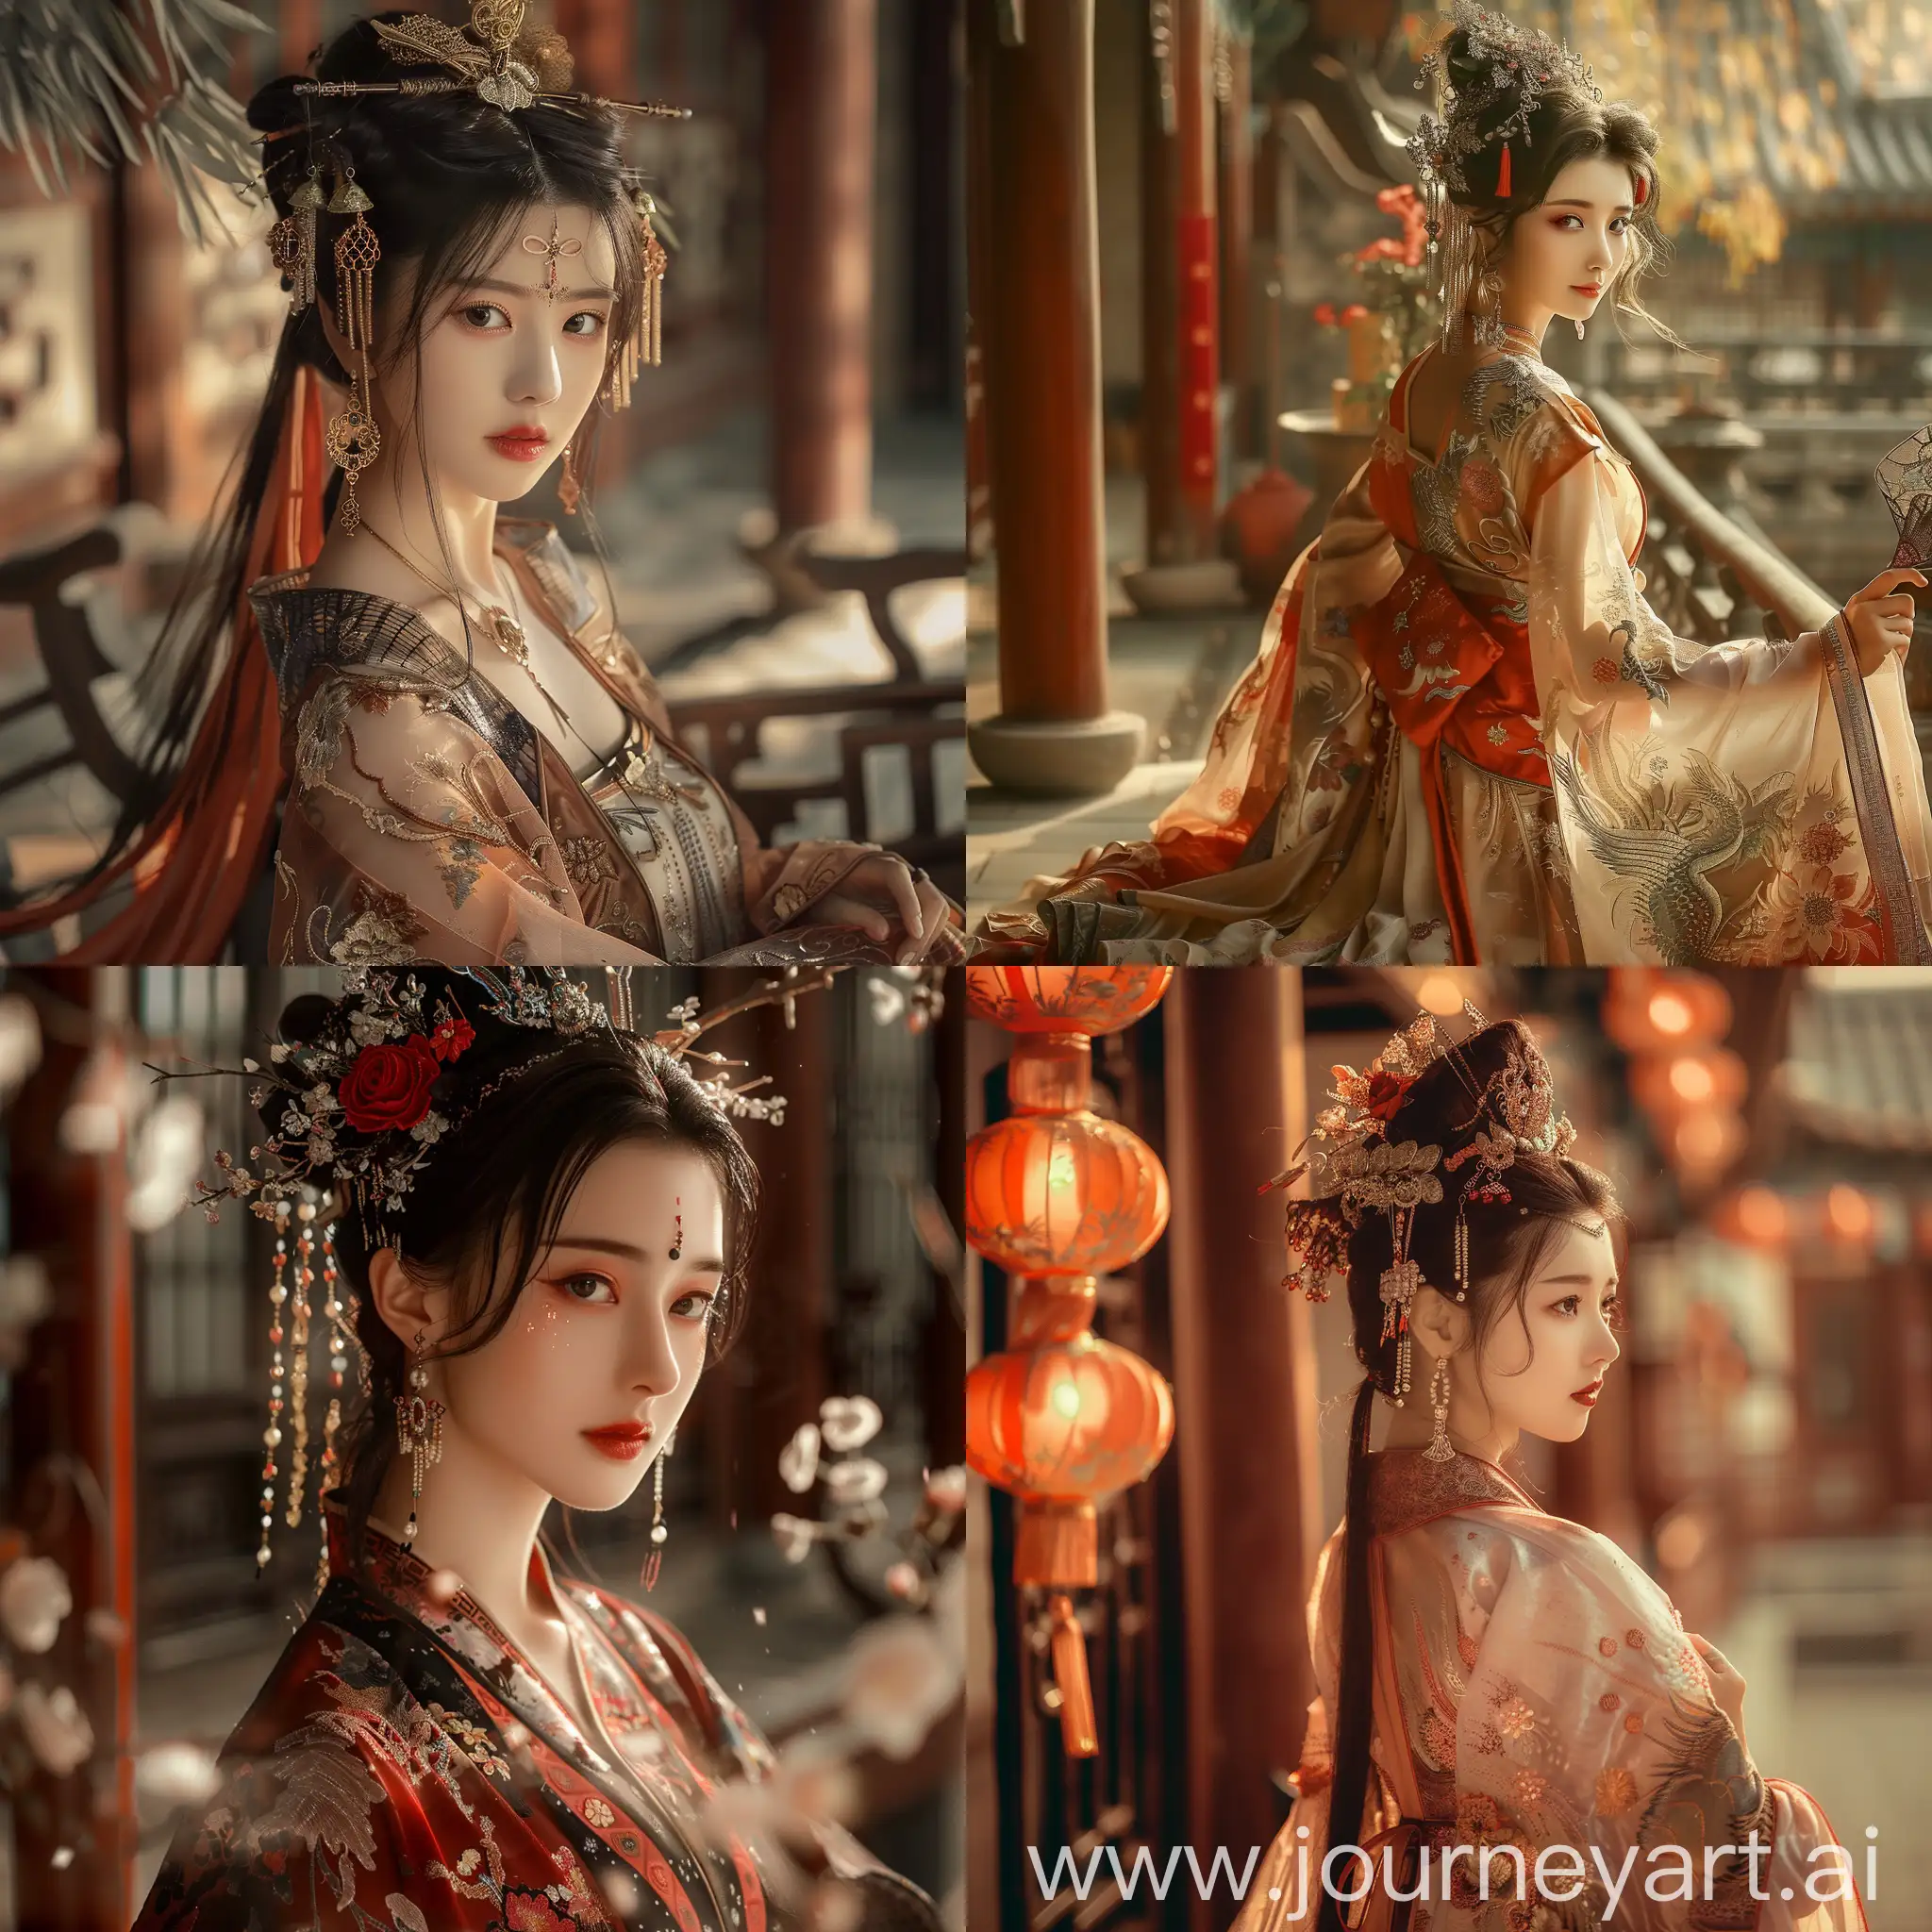 Ancient-Chinese-Beauty-in-Luxurious-Hanfu-Elegant-Courtyard-Portrait